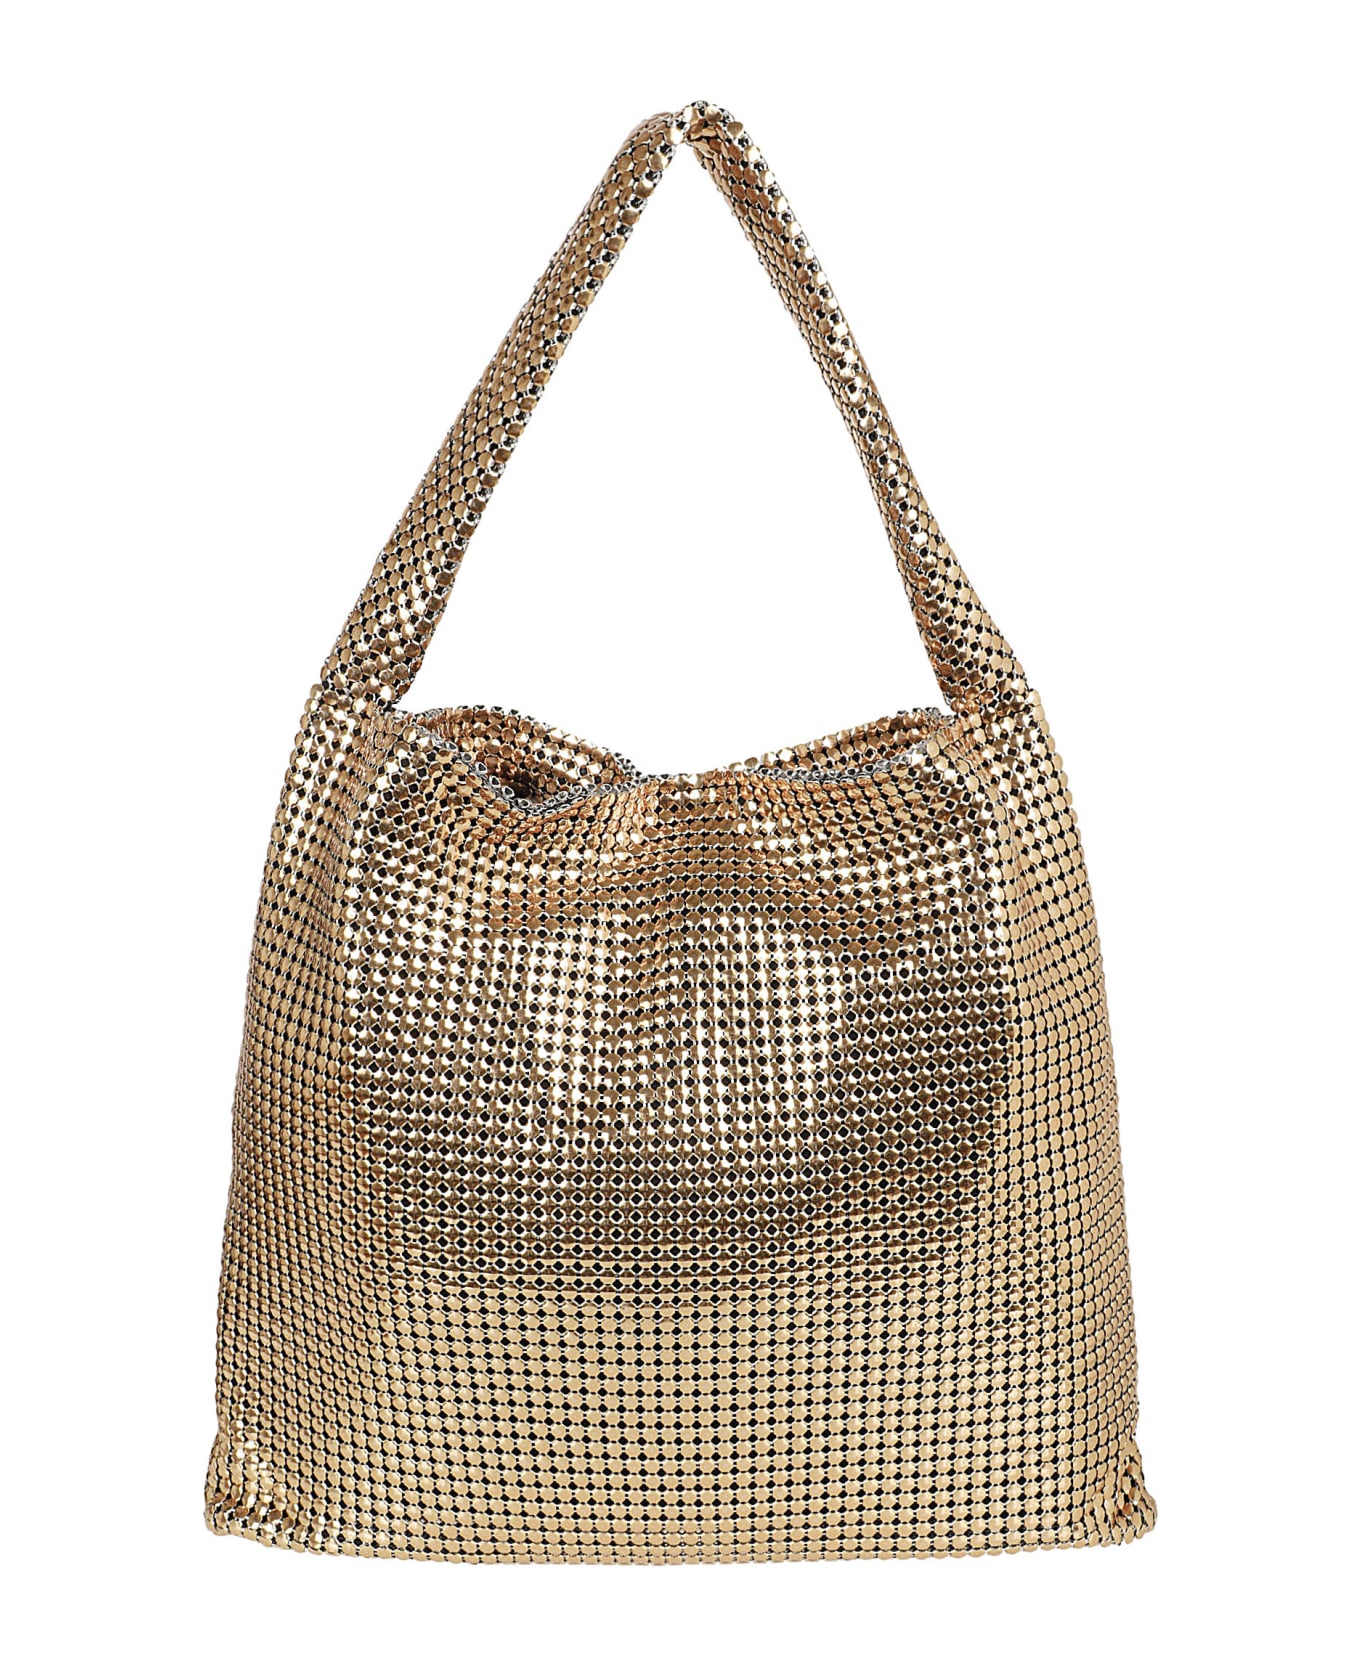 Paco Rabanne Pixel Tote - Gold